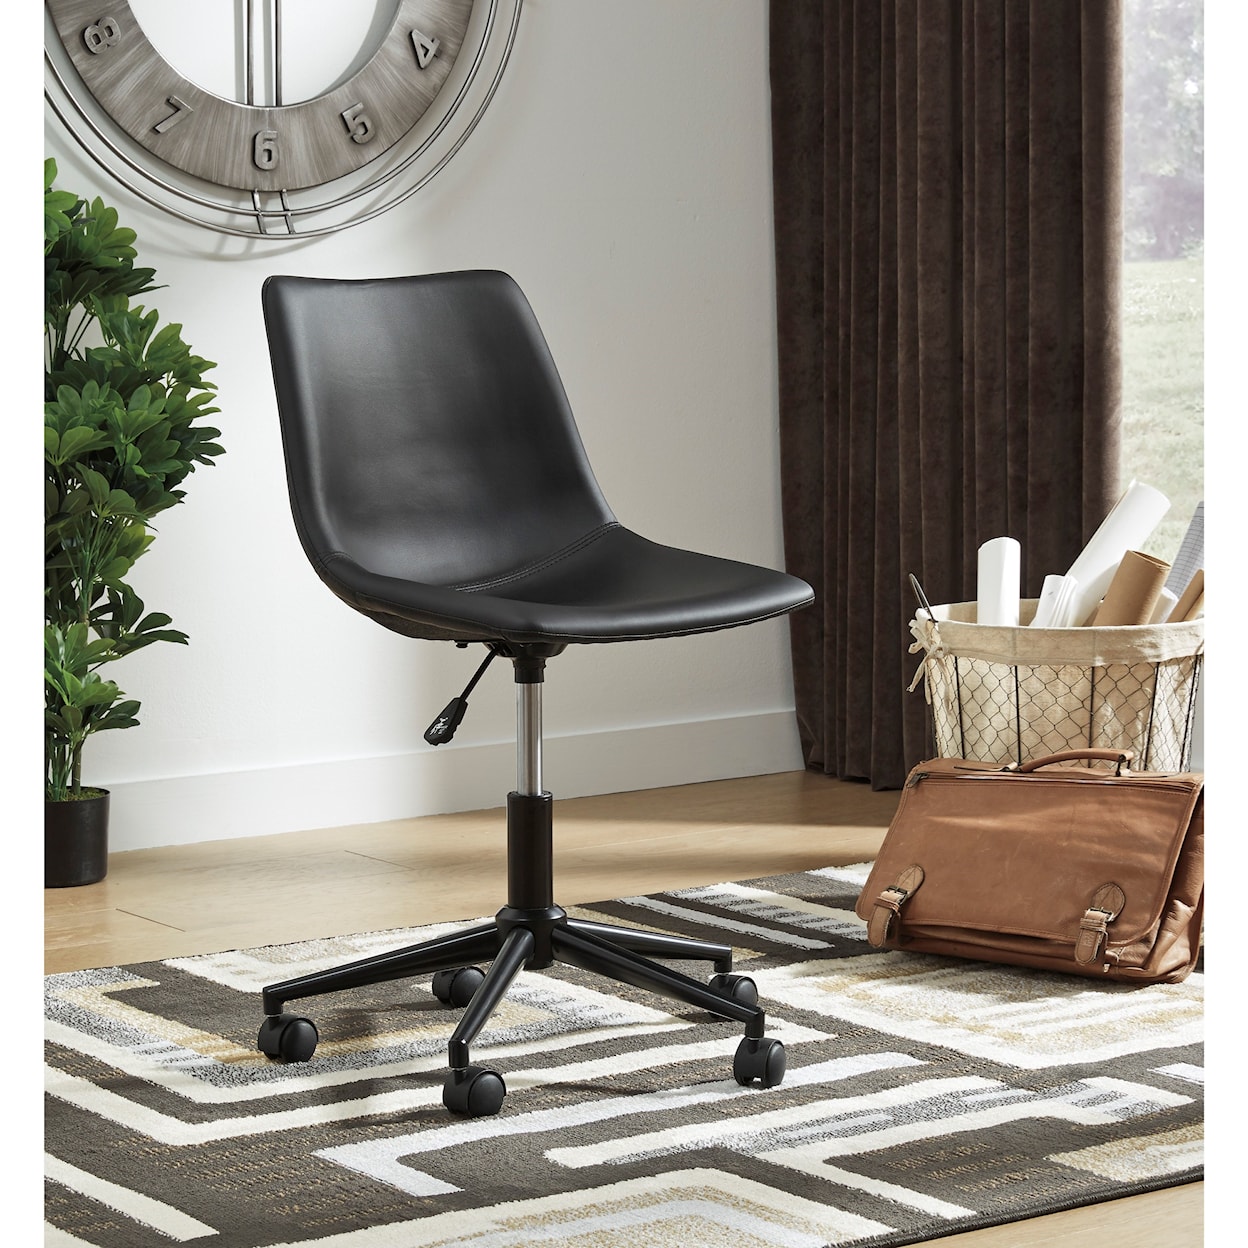 Signature Design by Ashley Office Chair Program Home Office Swivel Desk Chair